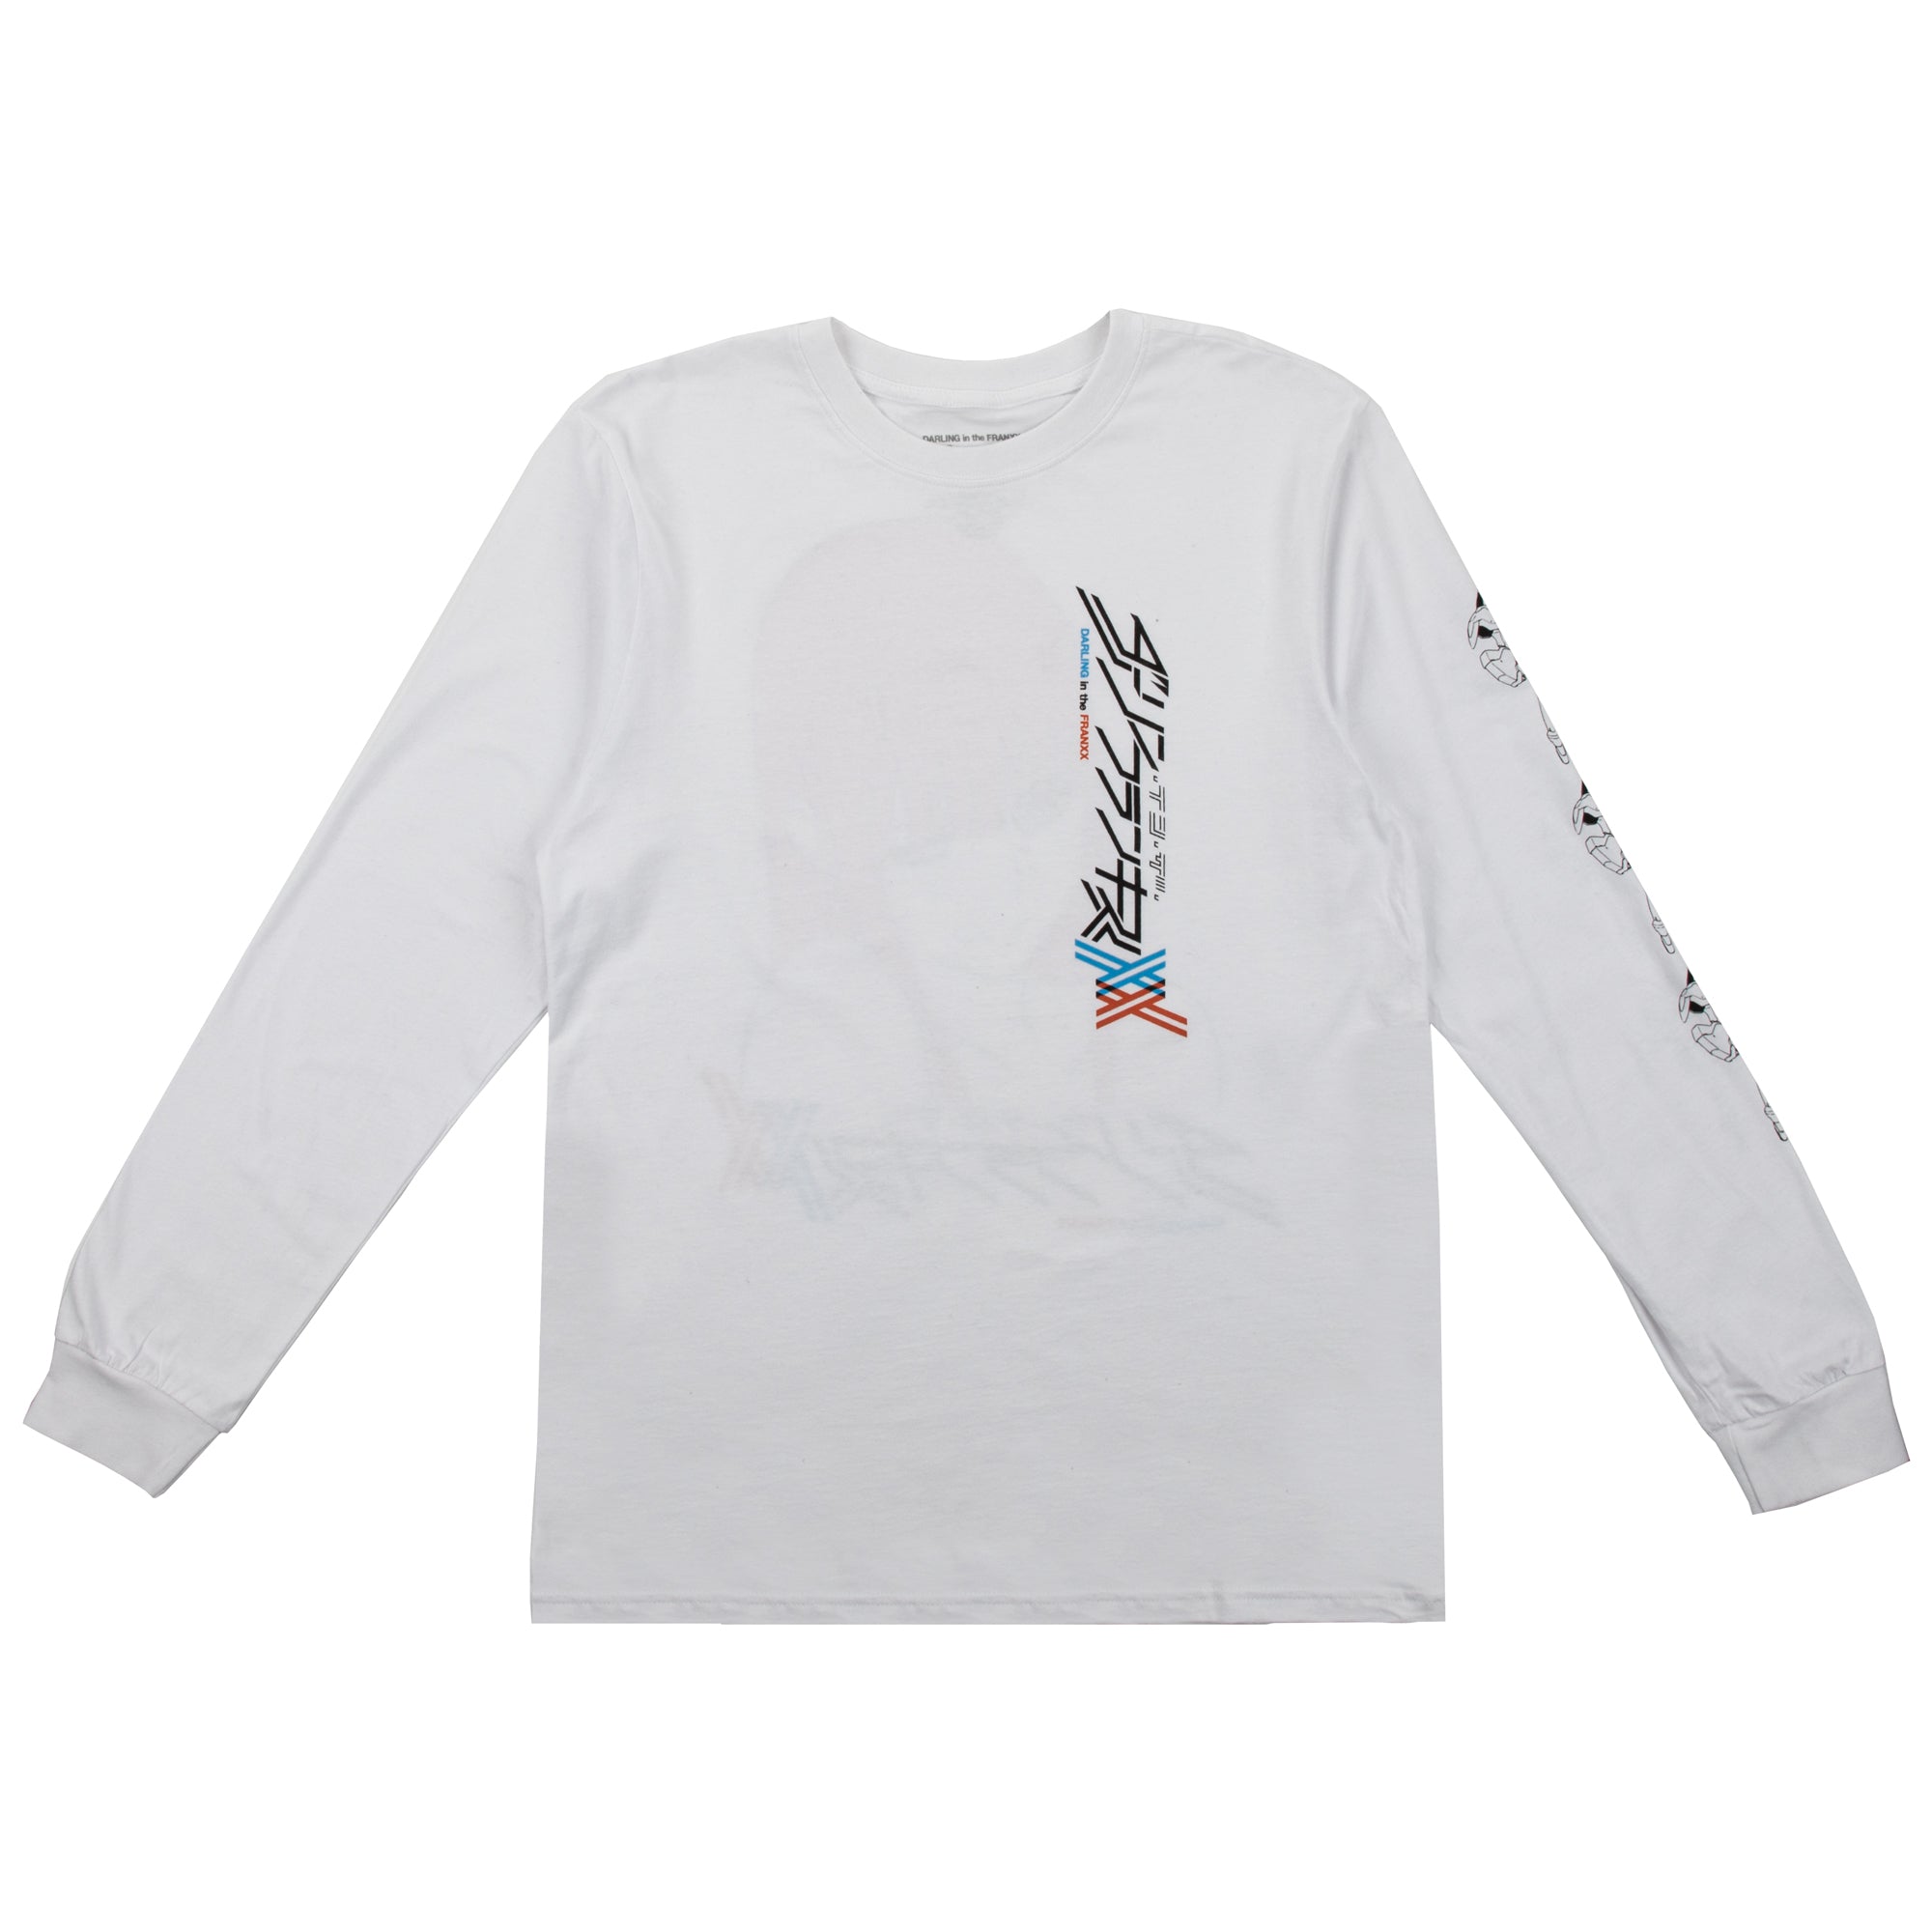 DARLING in the FRANXX - Zero Two Bust Strelizia Long Sleeve - Crunchyroll Exclusive! image count 2